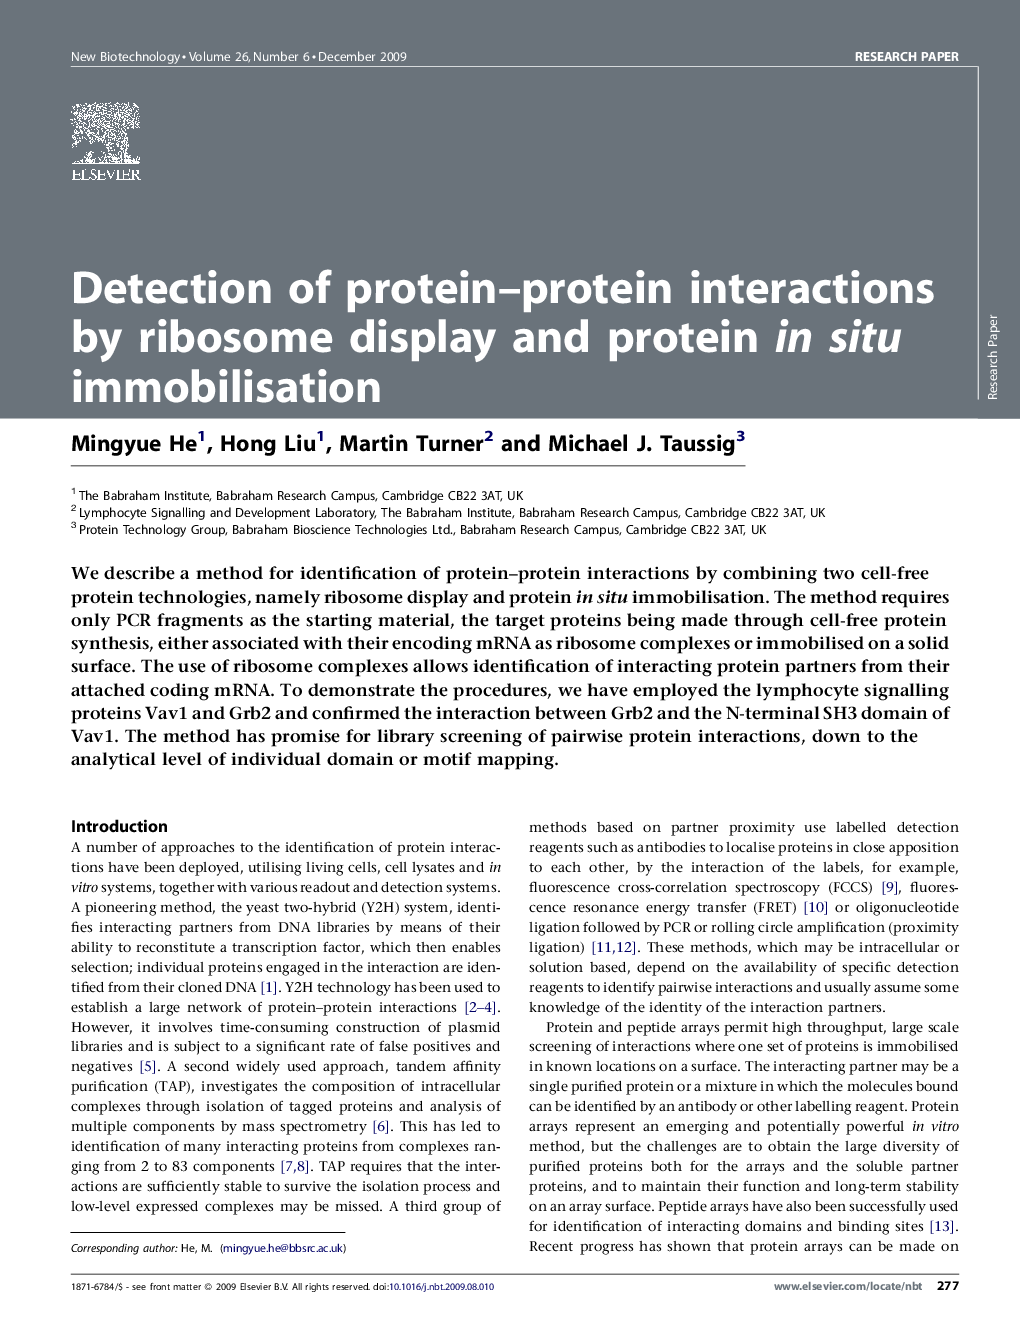 Detection of protein–protein interactions by ribosome display and protein in situ immobilisation